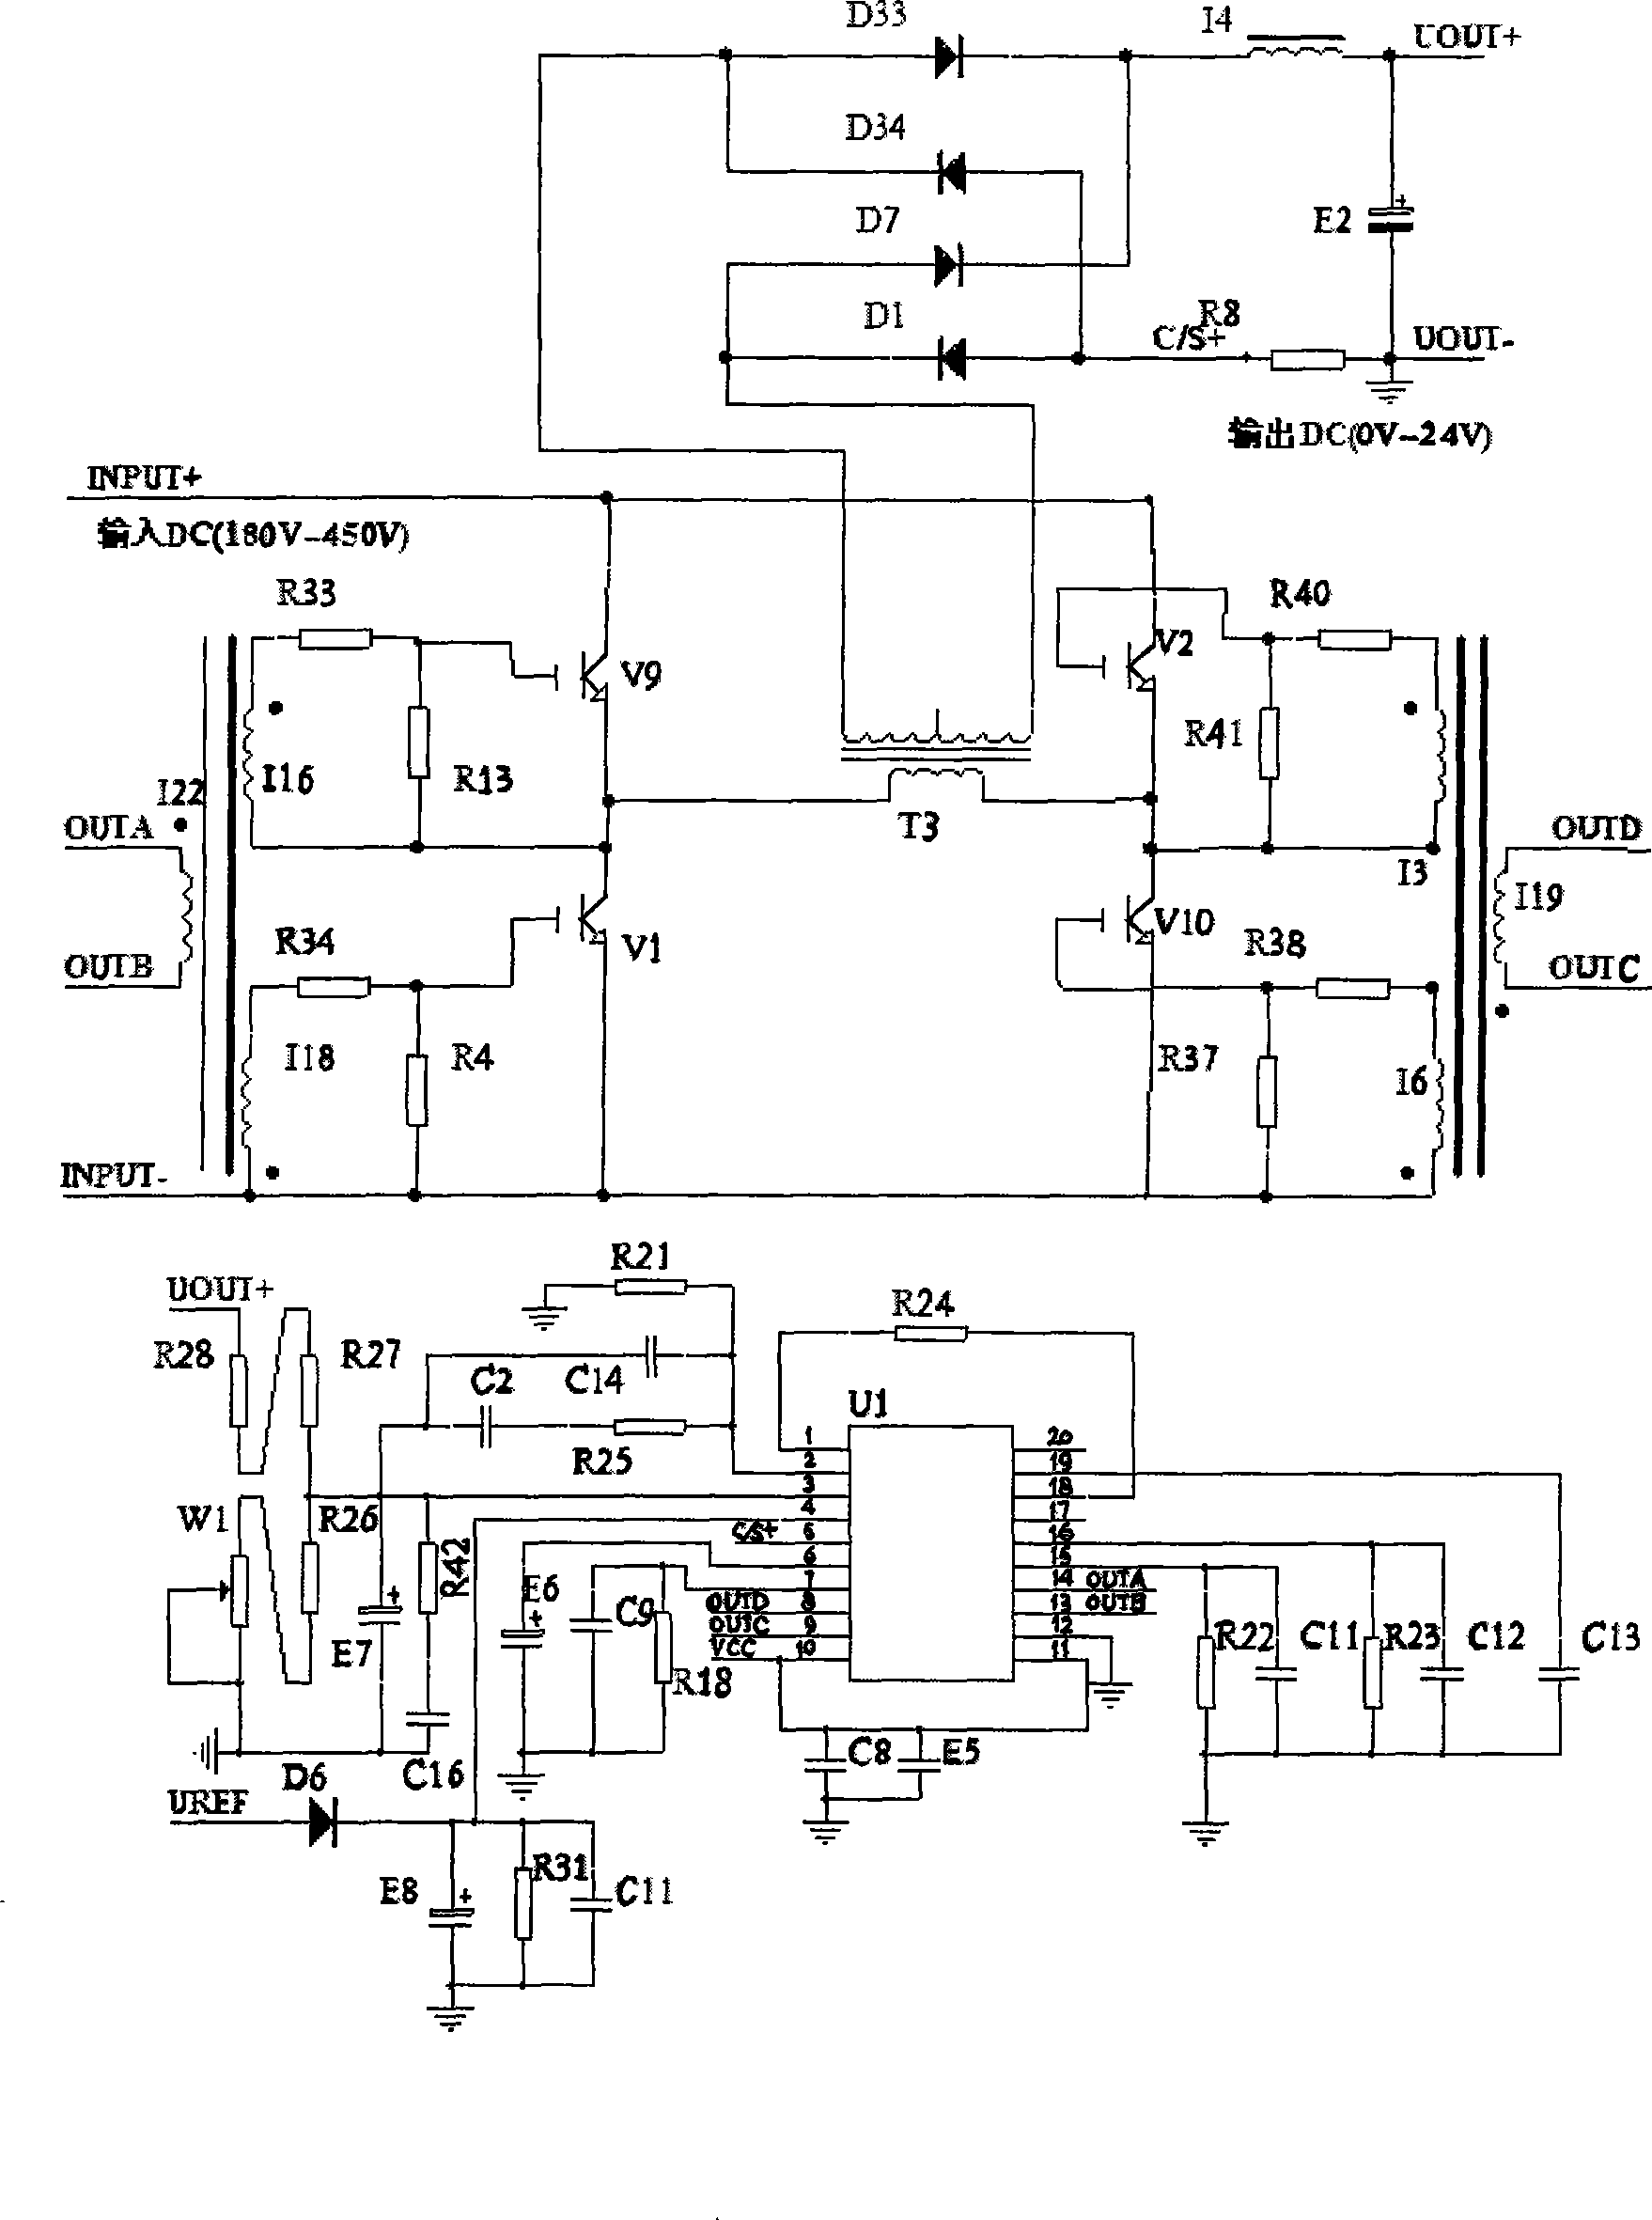 Automatic test system of dc circuit breaker characteristic parameter